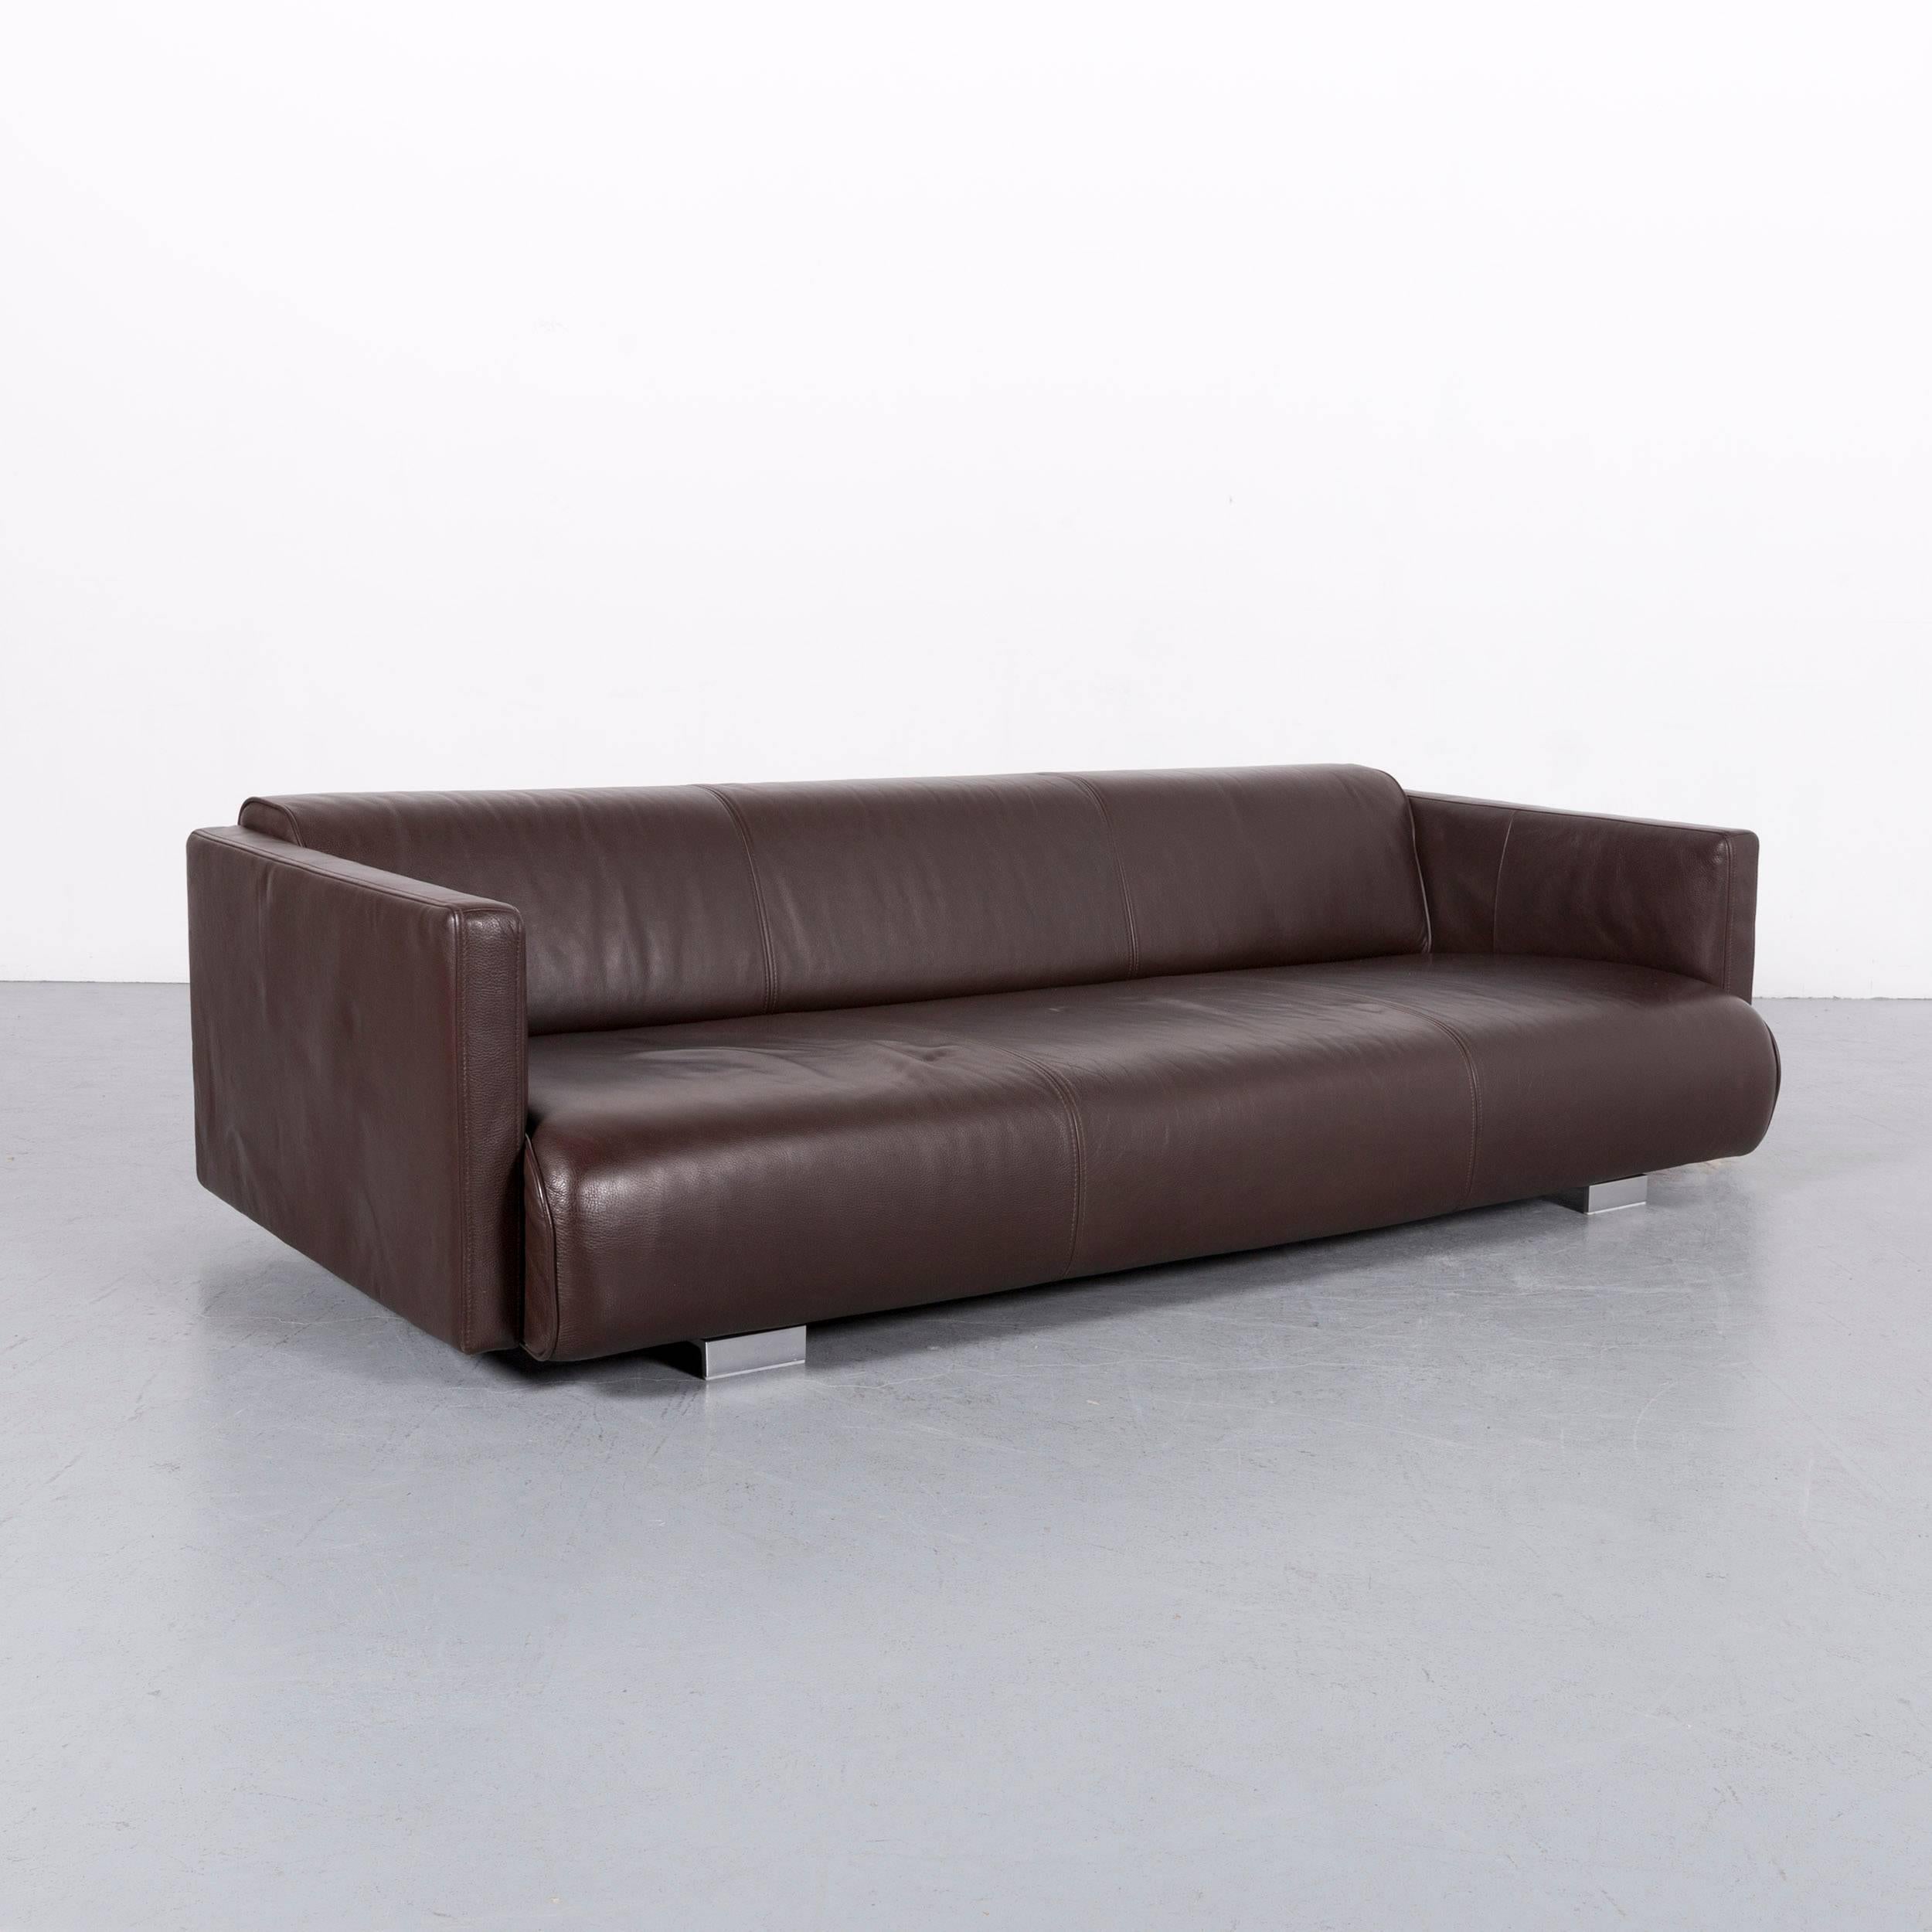 Contemporary Rolf Benz 6300 Sofa Set Leather Brown Three-Seat Bench